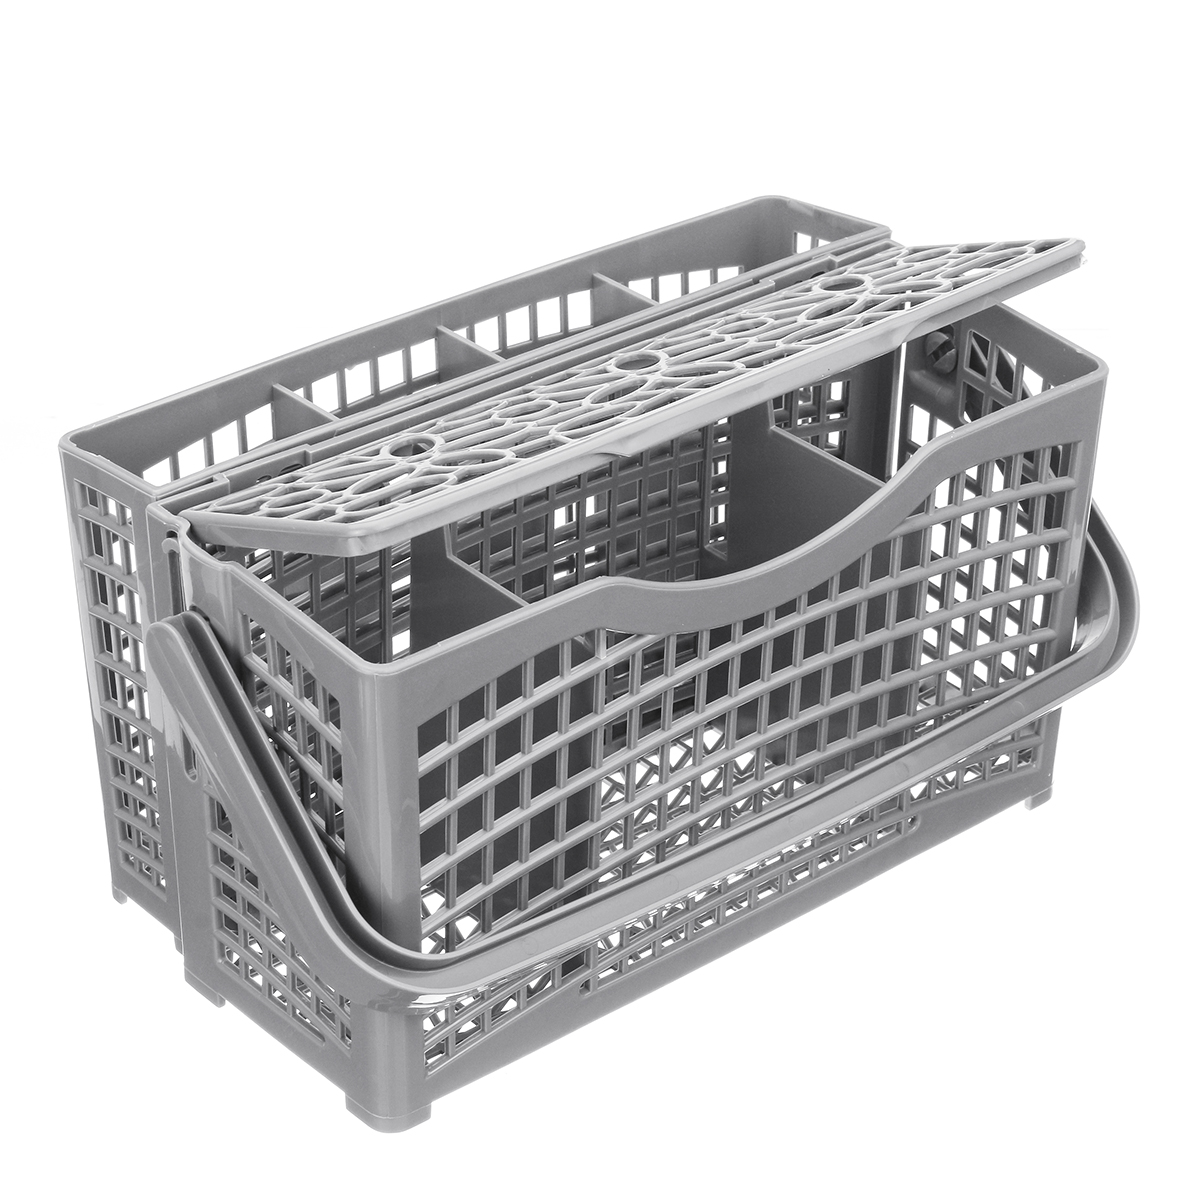 2-In-1-Universal-Dish-Washer-Cutlery-Basket-for-Maytag-Whirpool-LG-Samsung-1579731-6